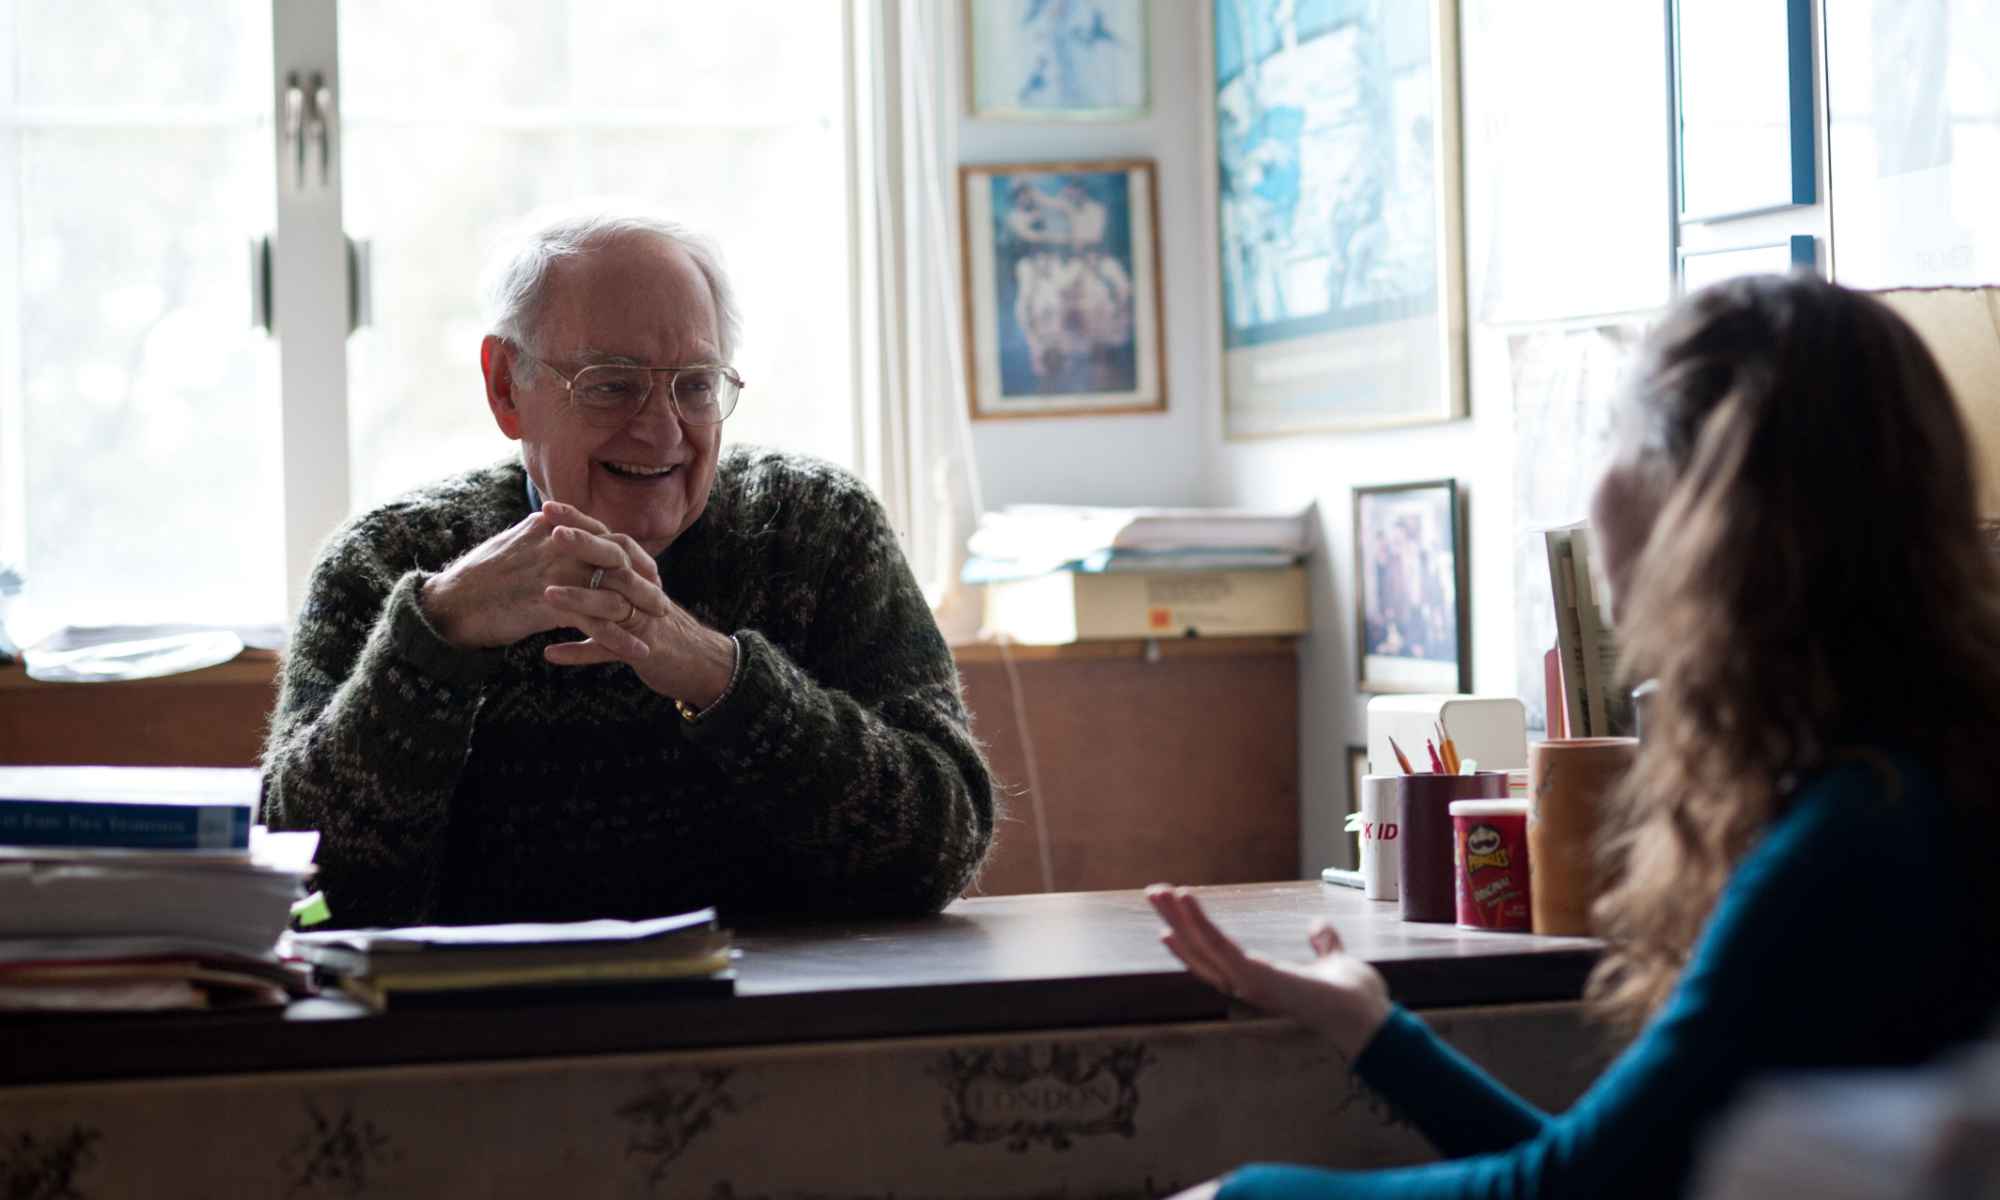 Russell Peck at his desk smiling while talking to a student, who is seen from behind.